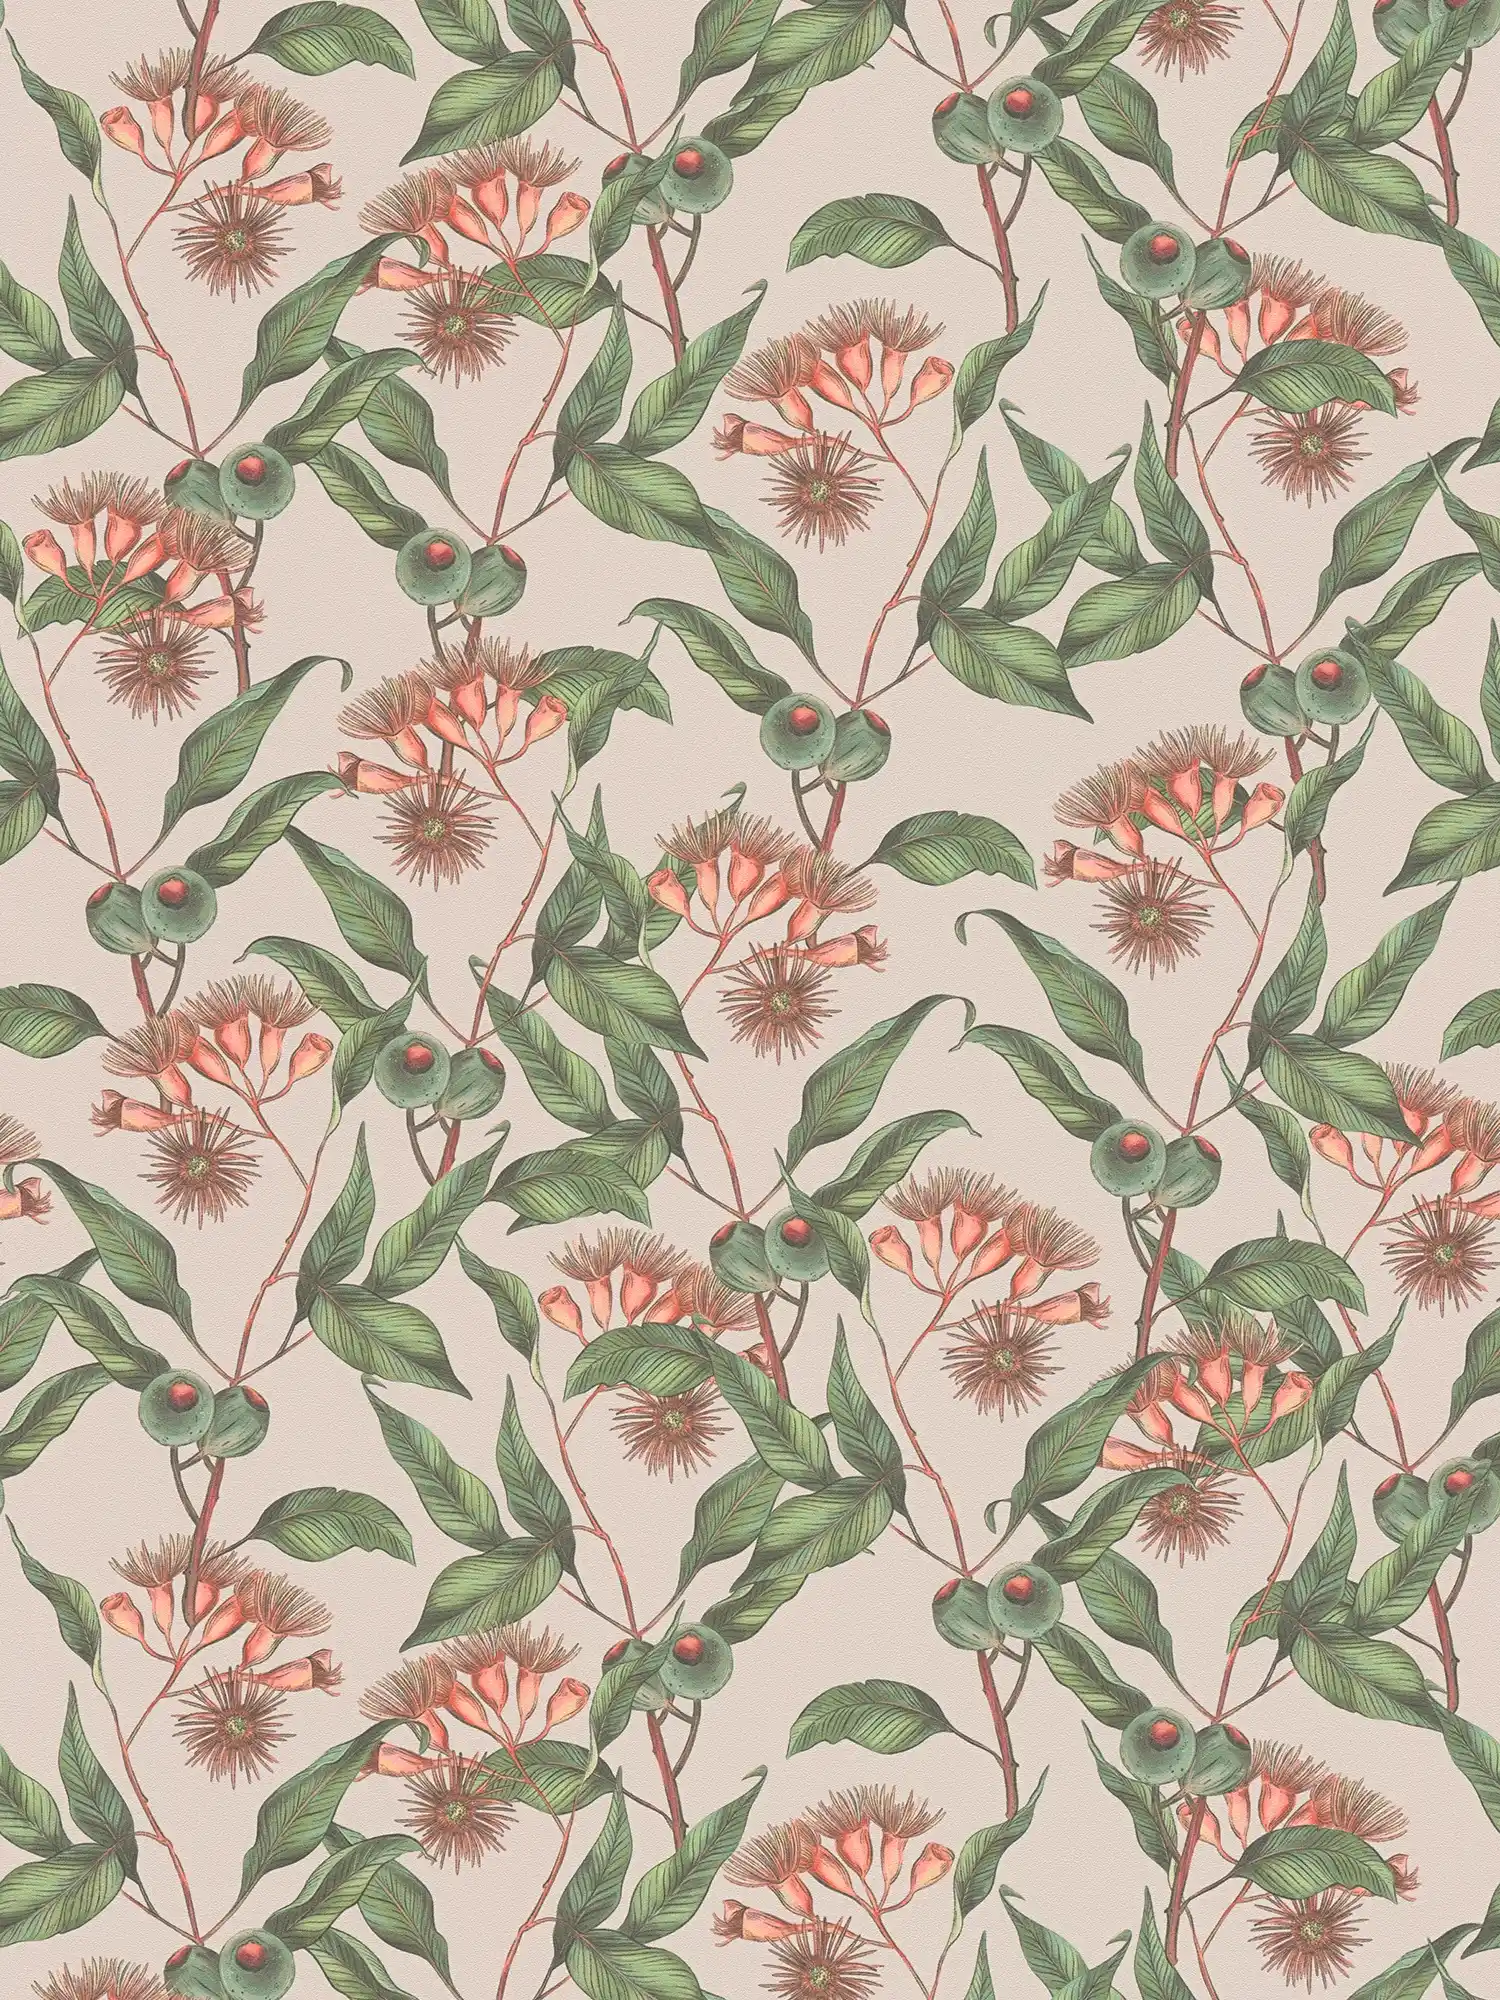 Modern floral style wallpaper with leaves & flowers textured matt - beige, green, red
